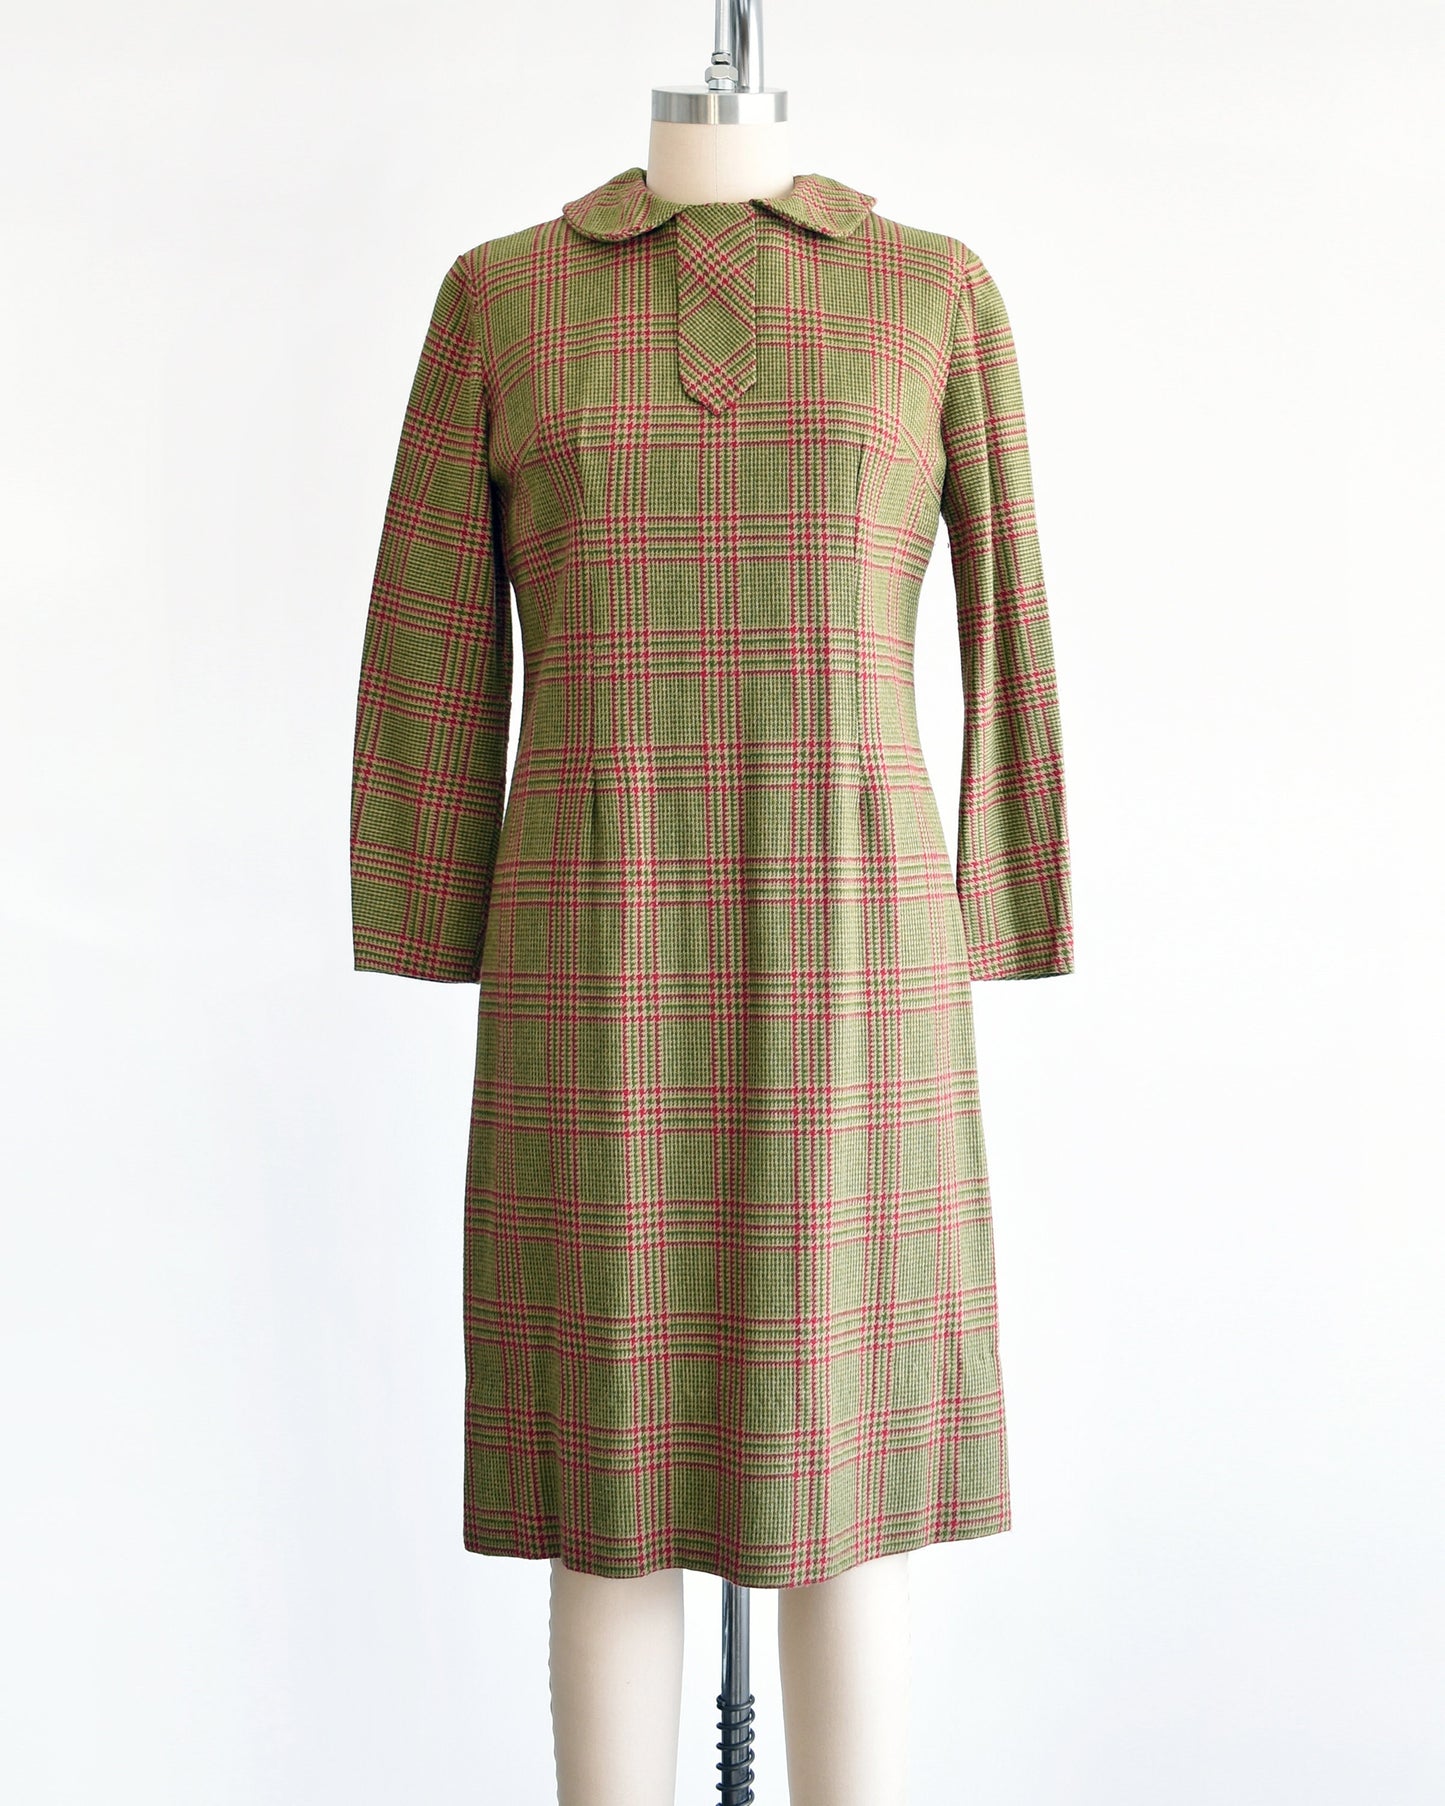 A vintage 60s green and pink plaid wool dress with Peter Pan style collar and long sleeves. The dress is modeled on a dress form.